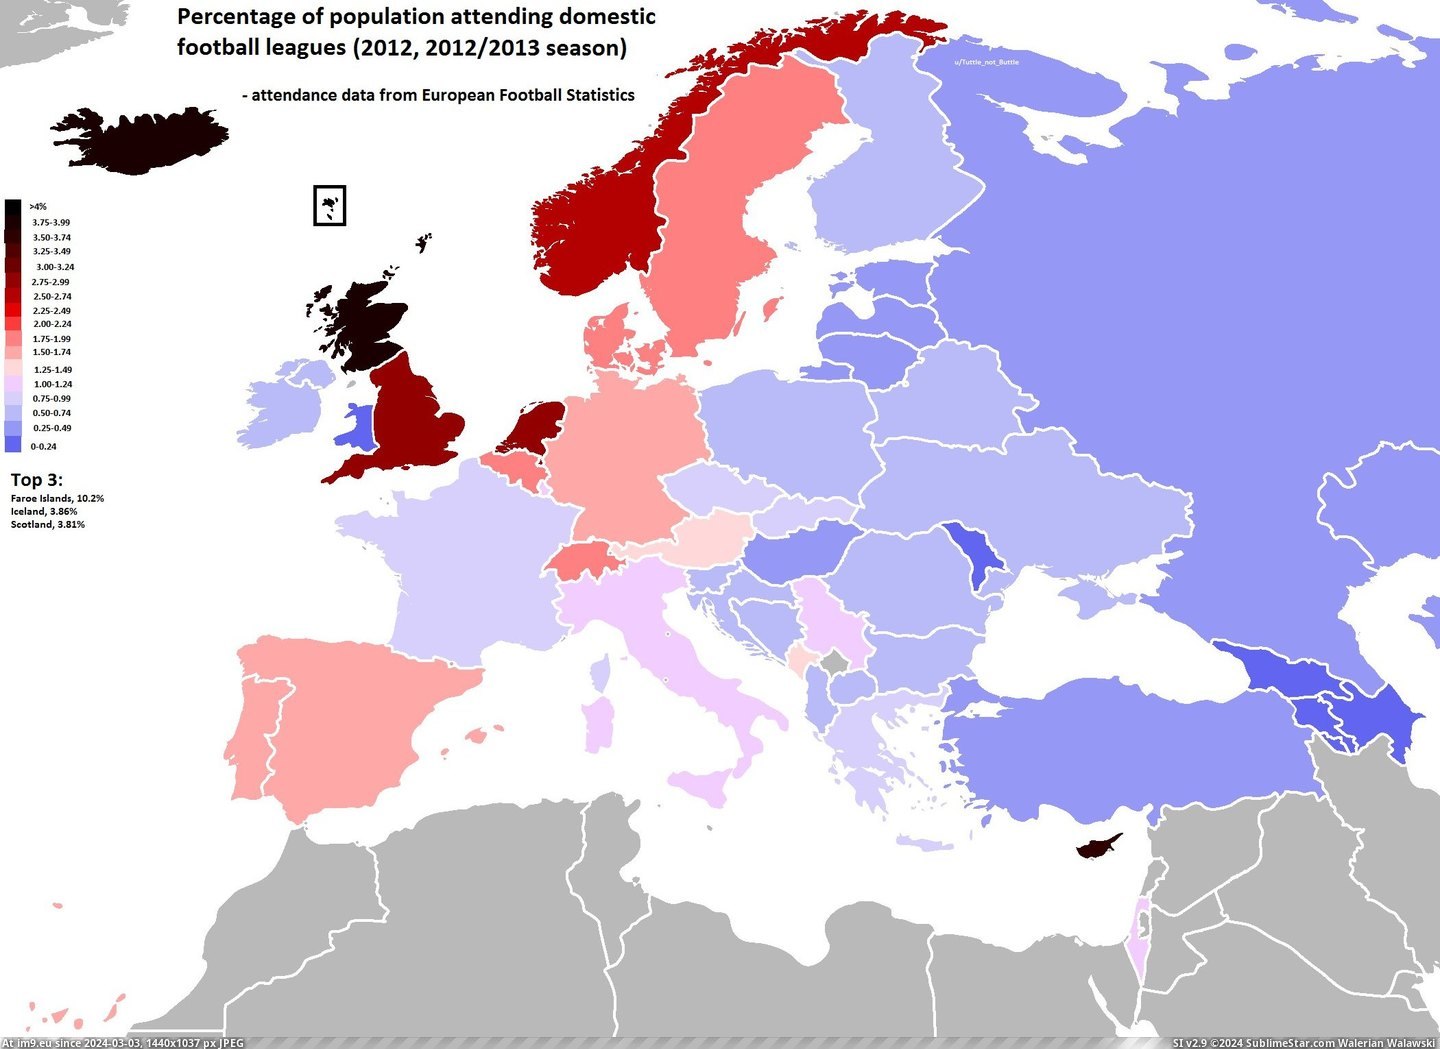 #European #Population #Football #Domestic #Leagues #Attending #Numbered #Percentage #Details #2100x1525 [Mapporn] Percentage of European population attending domestic football leagues (2100x1525) [OC] (details & numbered version Pic. (Изображение из альбом My r/MAPS favs))